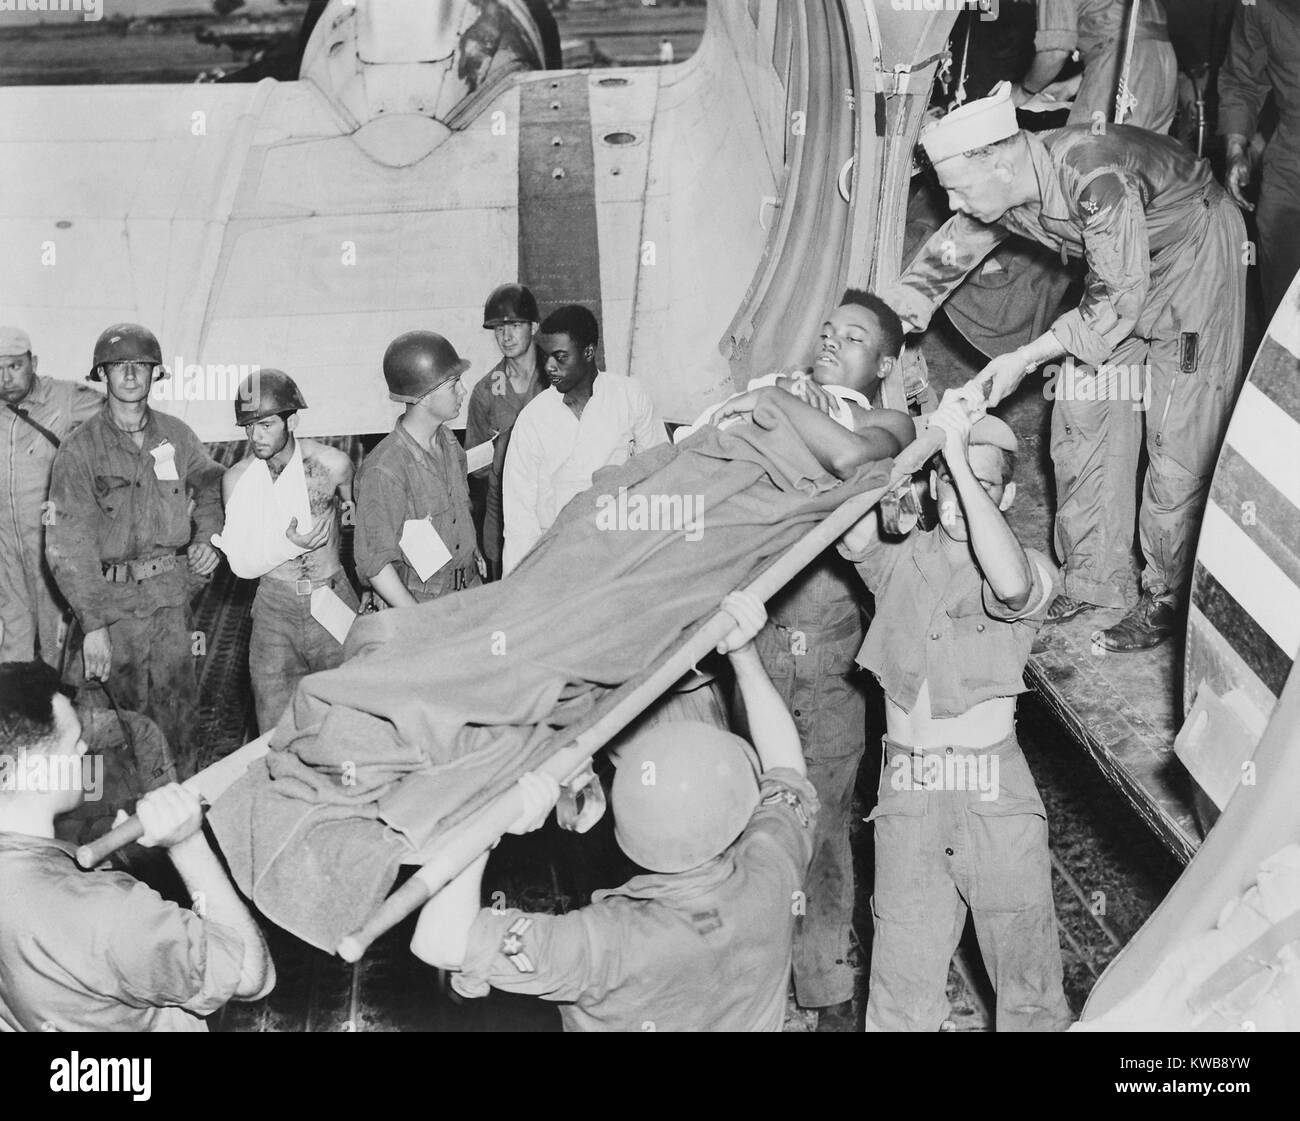 U.S. soldier is lifted from a Air Force C-47 in Japan from an airstrip near the battle front in Korea. Other wounded soldiers stand by the plane's wing. Air evacuation saved lives of many soldiers with wounds that killed in World War 2. Korean War, 1950-53. (BSLOC 2014 11 201) Stock Photo